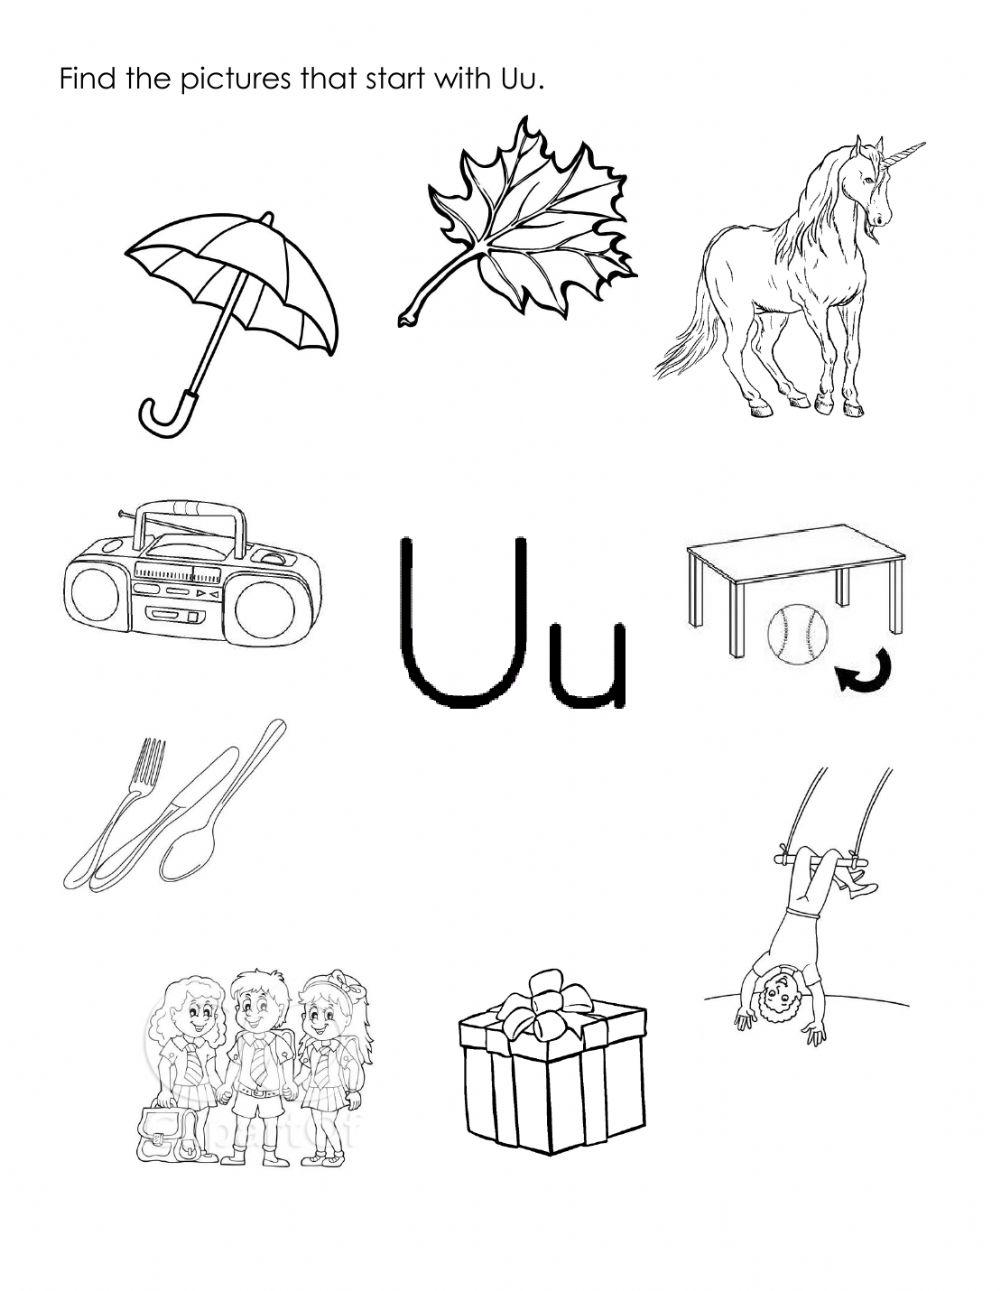 Find all the Uu pictures.